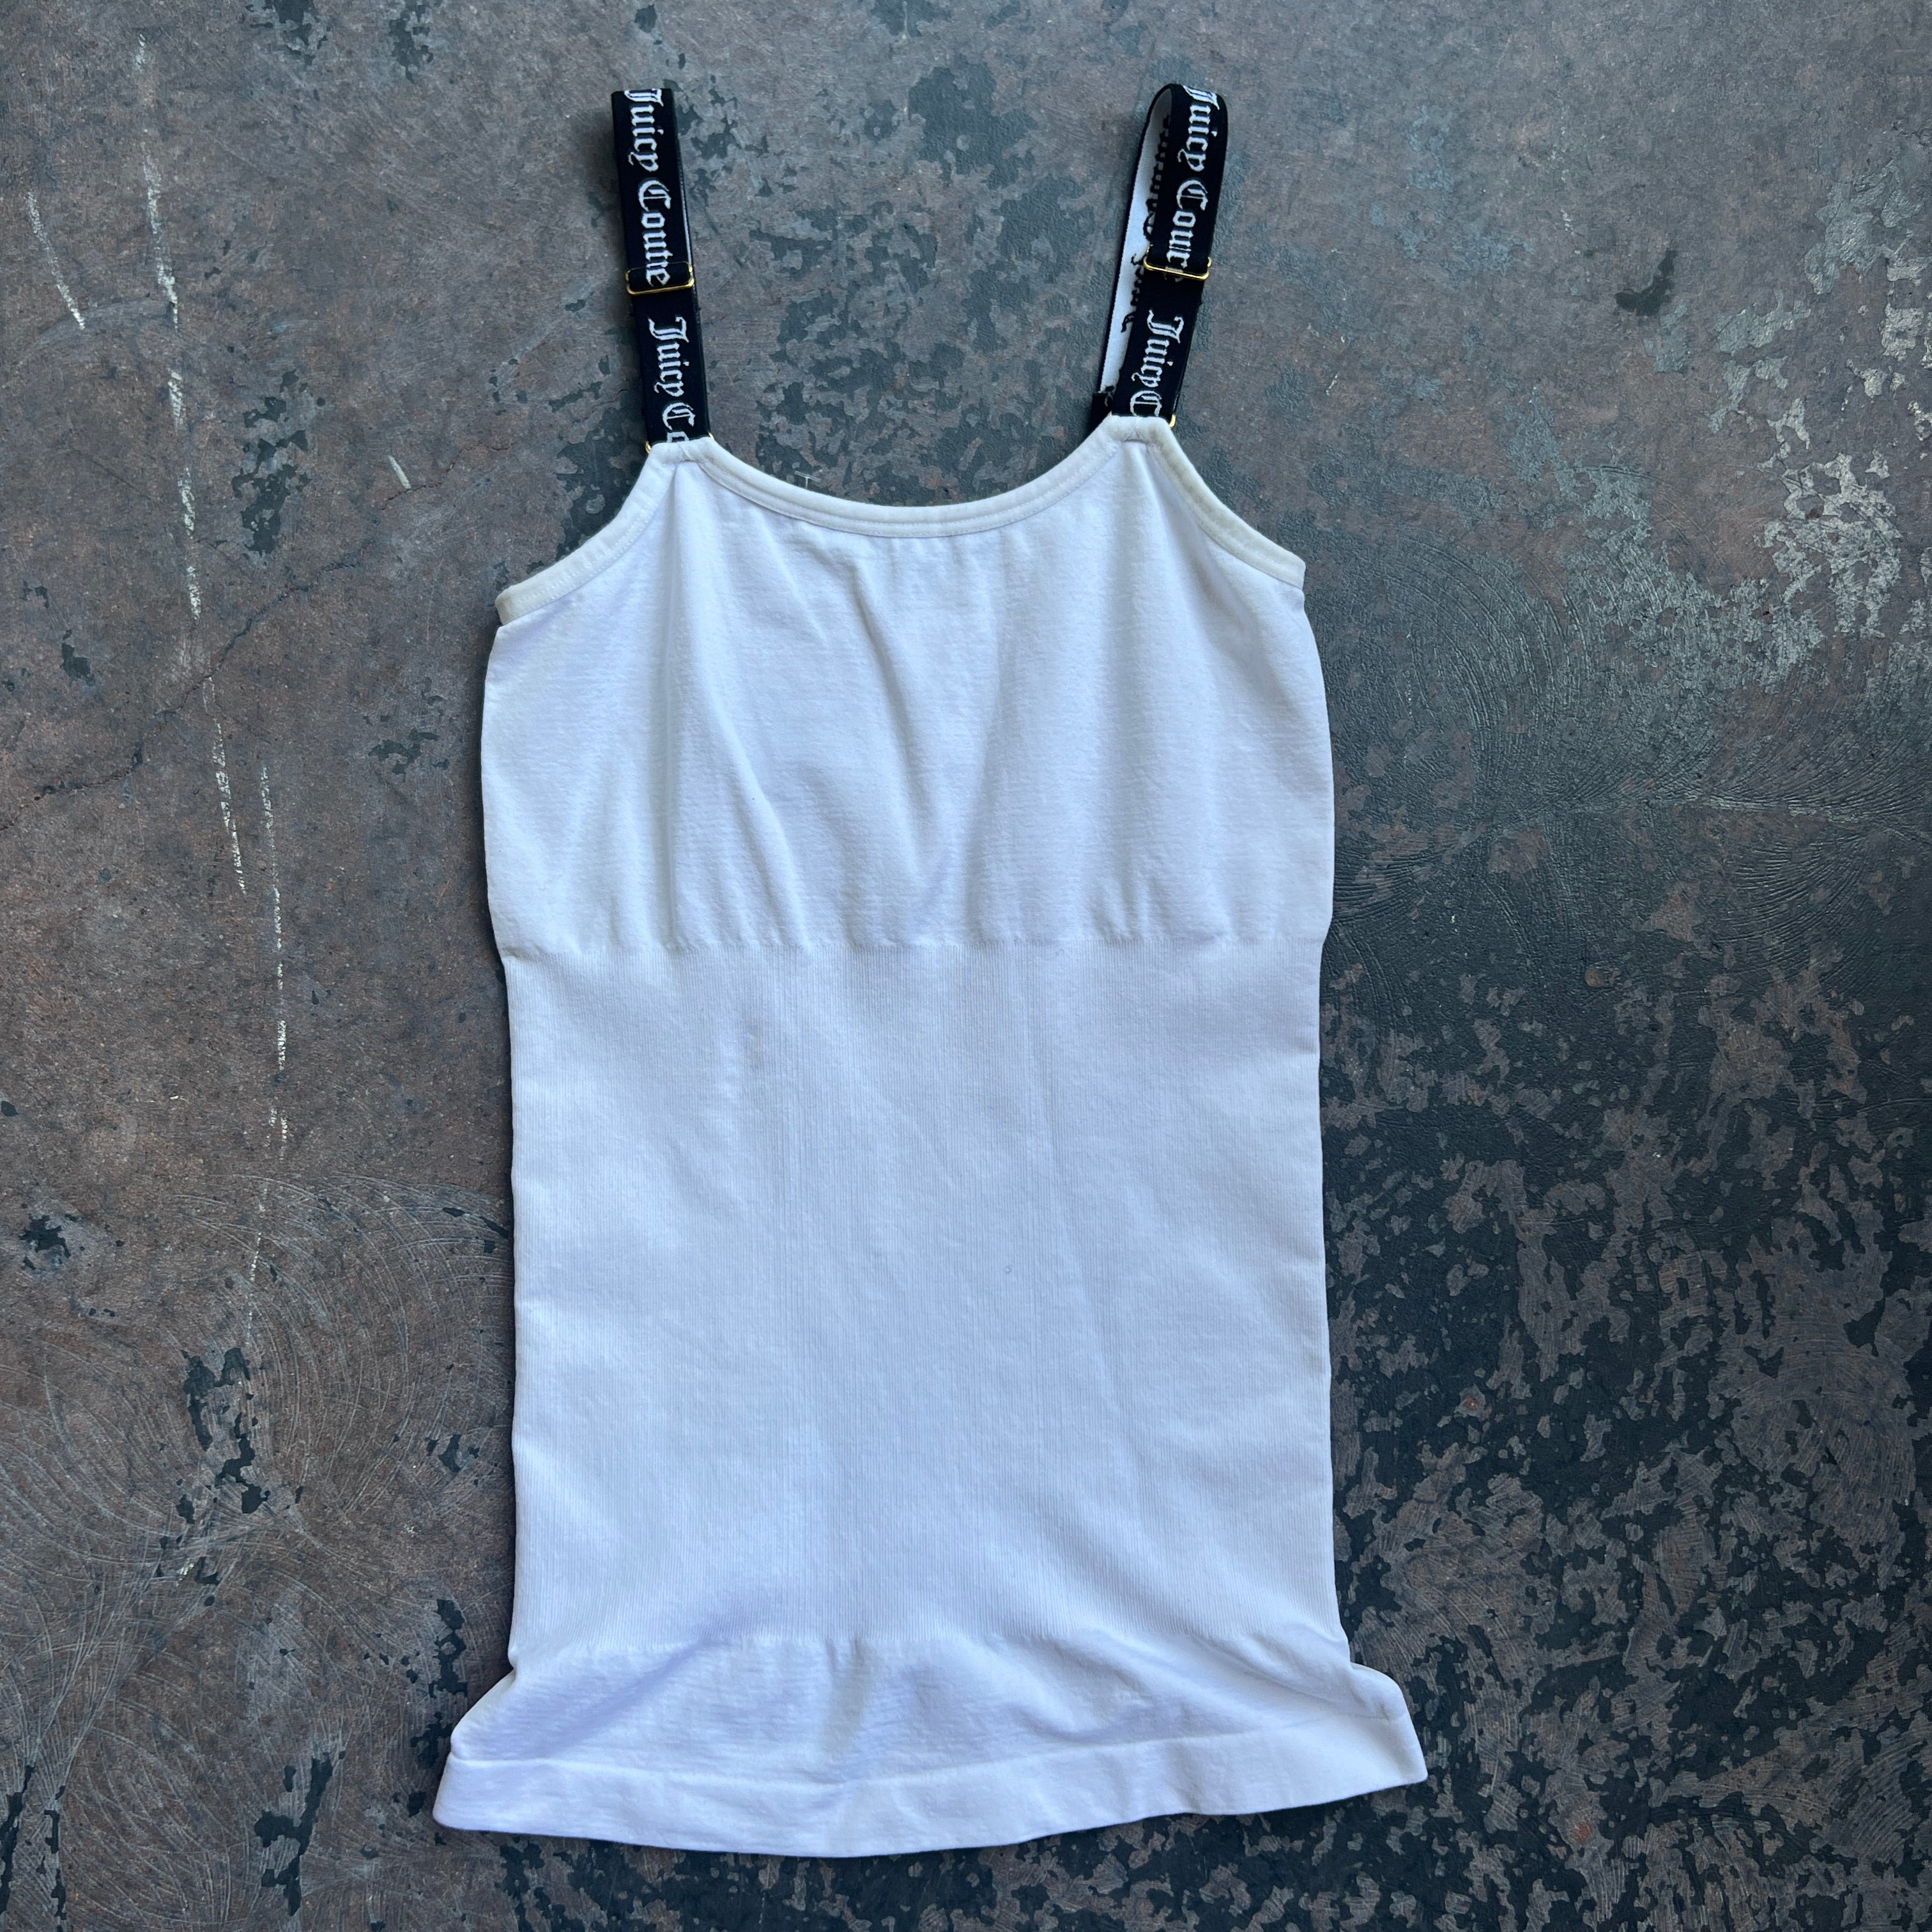 Juicy Couture White Tank Top Size M